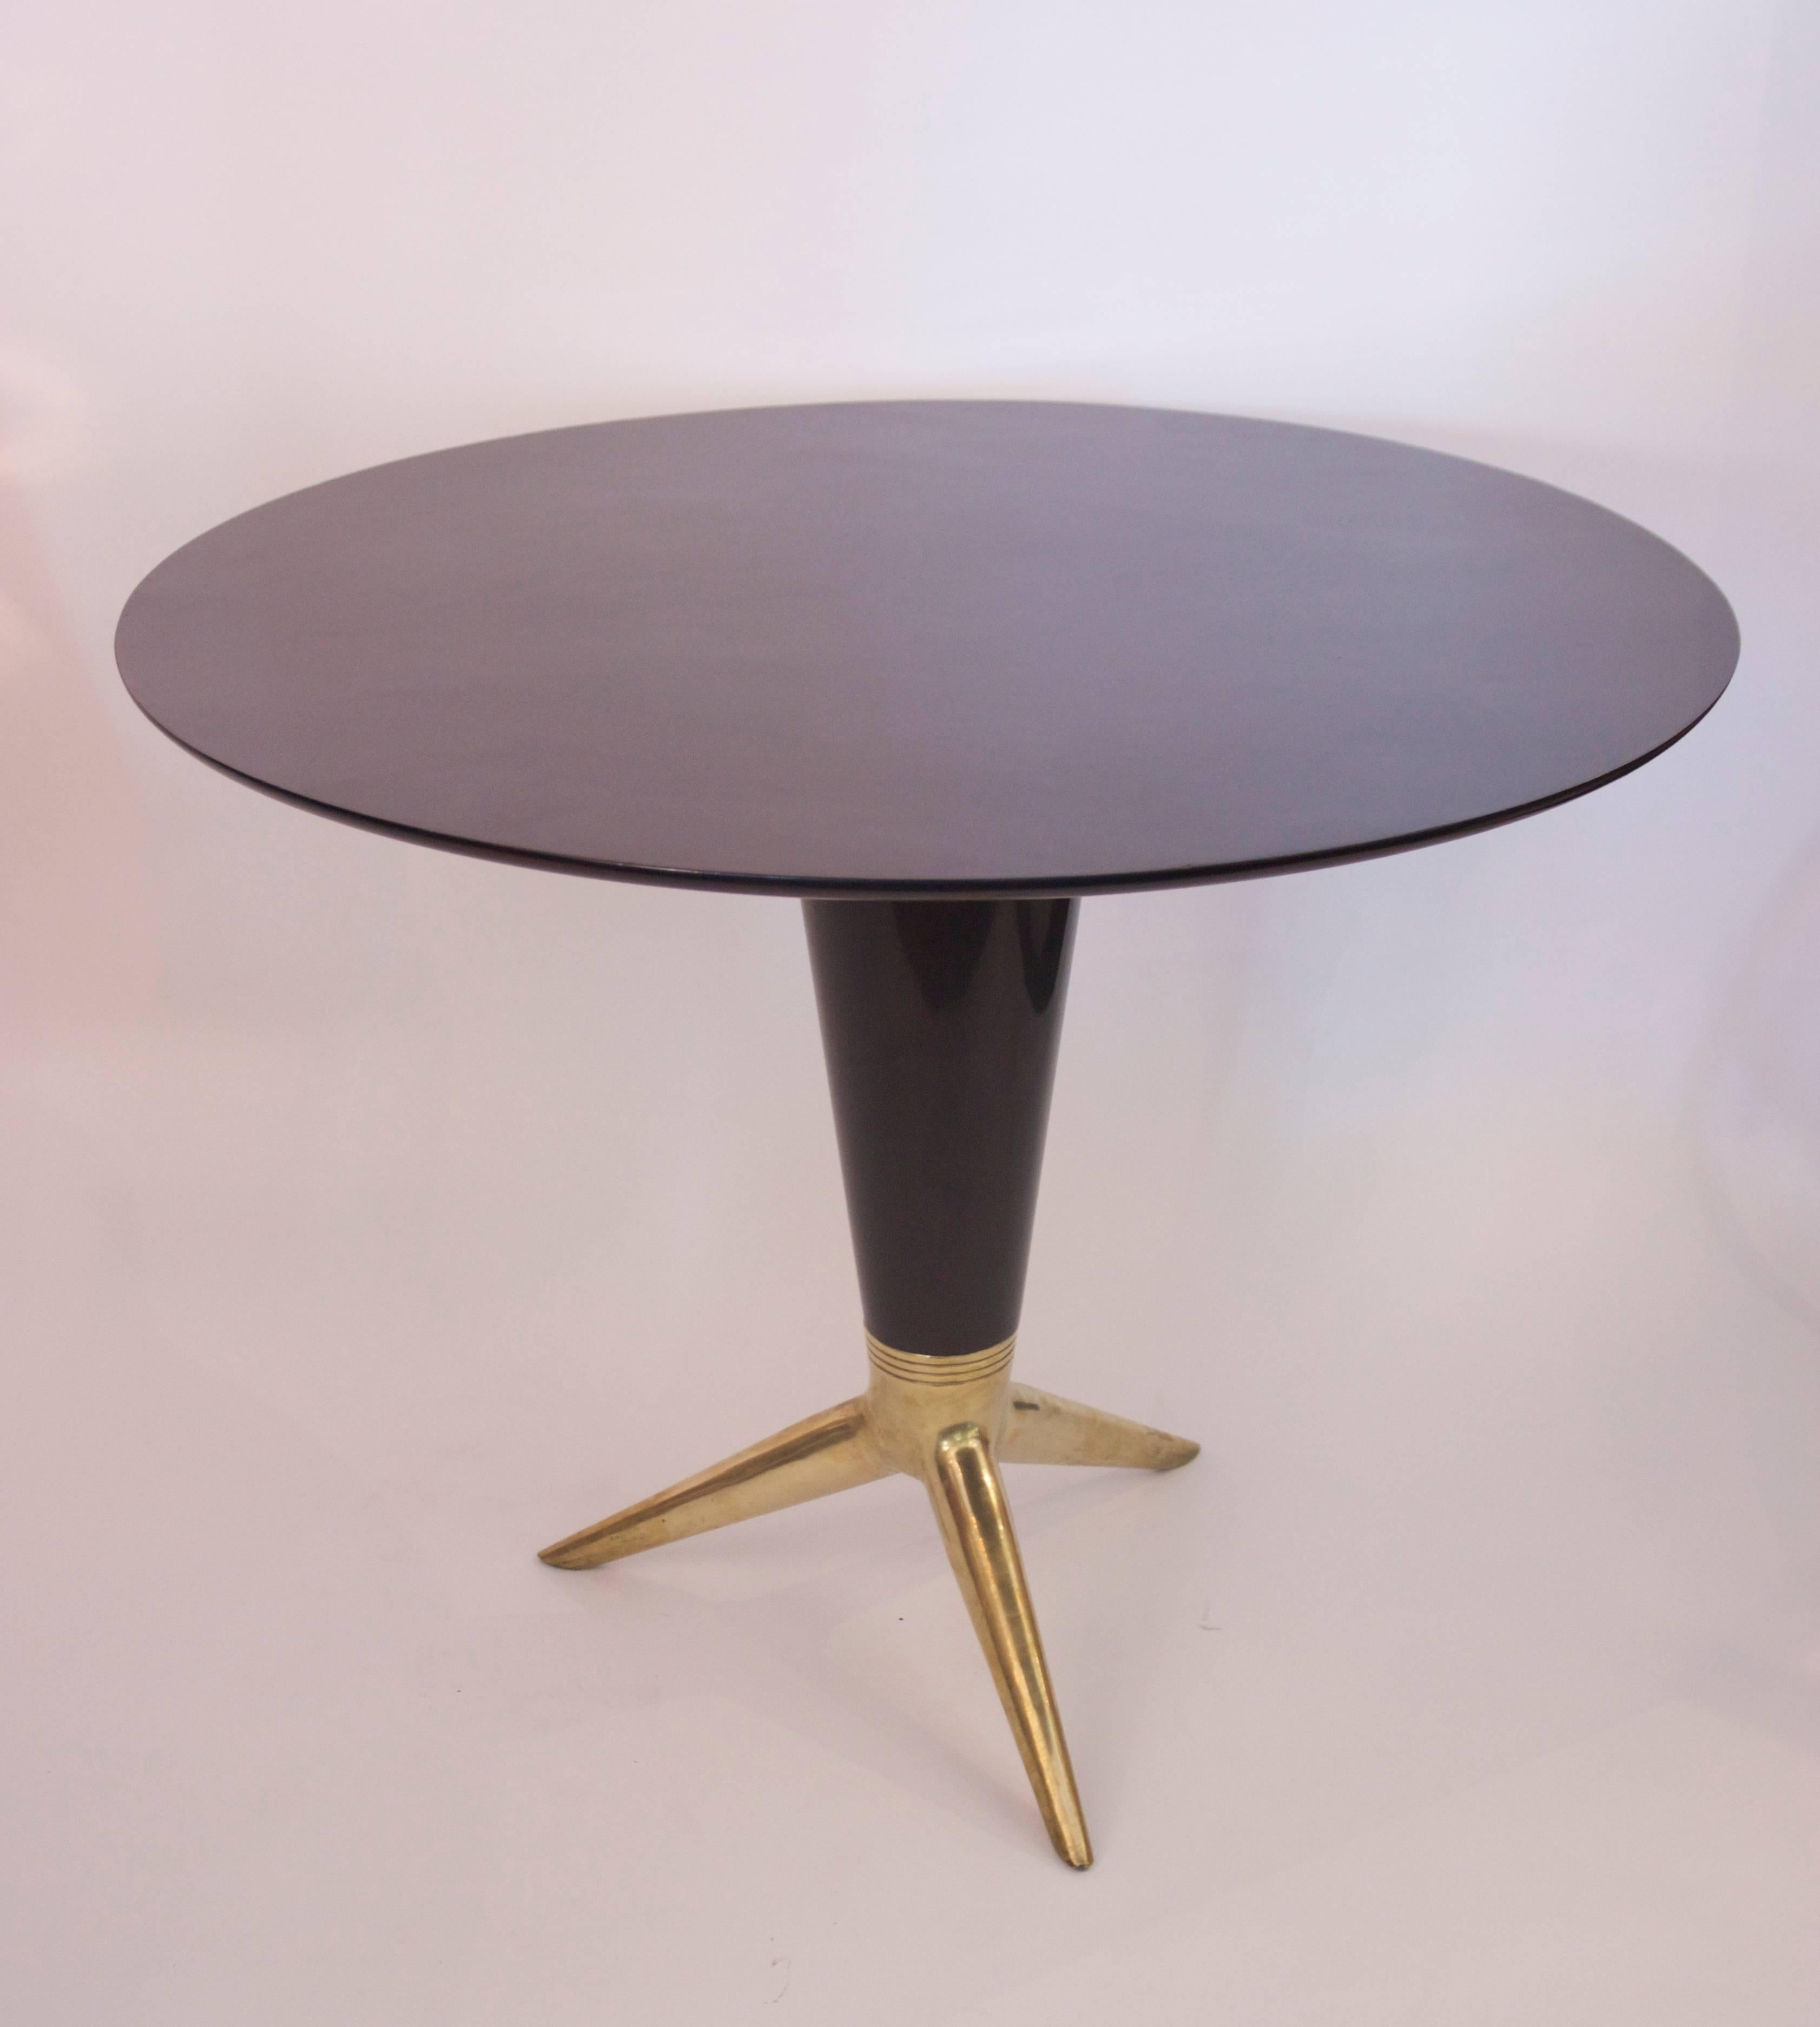 Pedestal table in the style of Gio Ponti,
Black lacquered wood and gilded bronze base,
circa 1950, Italy.
Measures: Height 79 cm, diameter 98 cm.